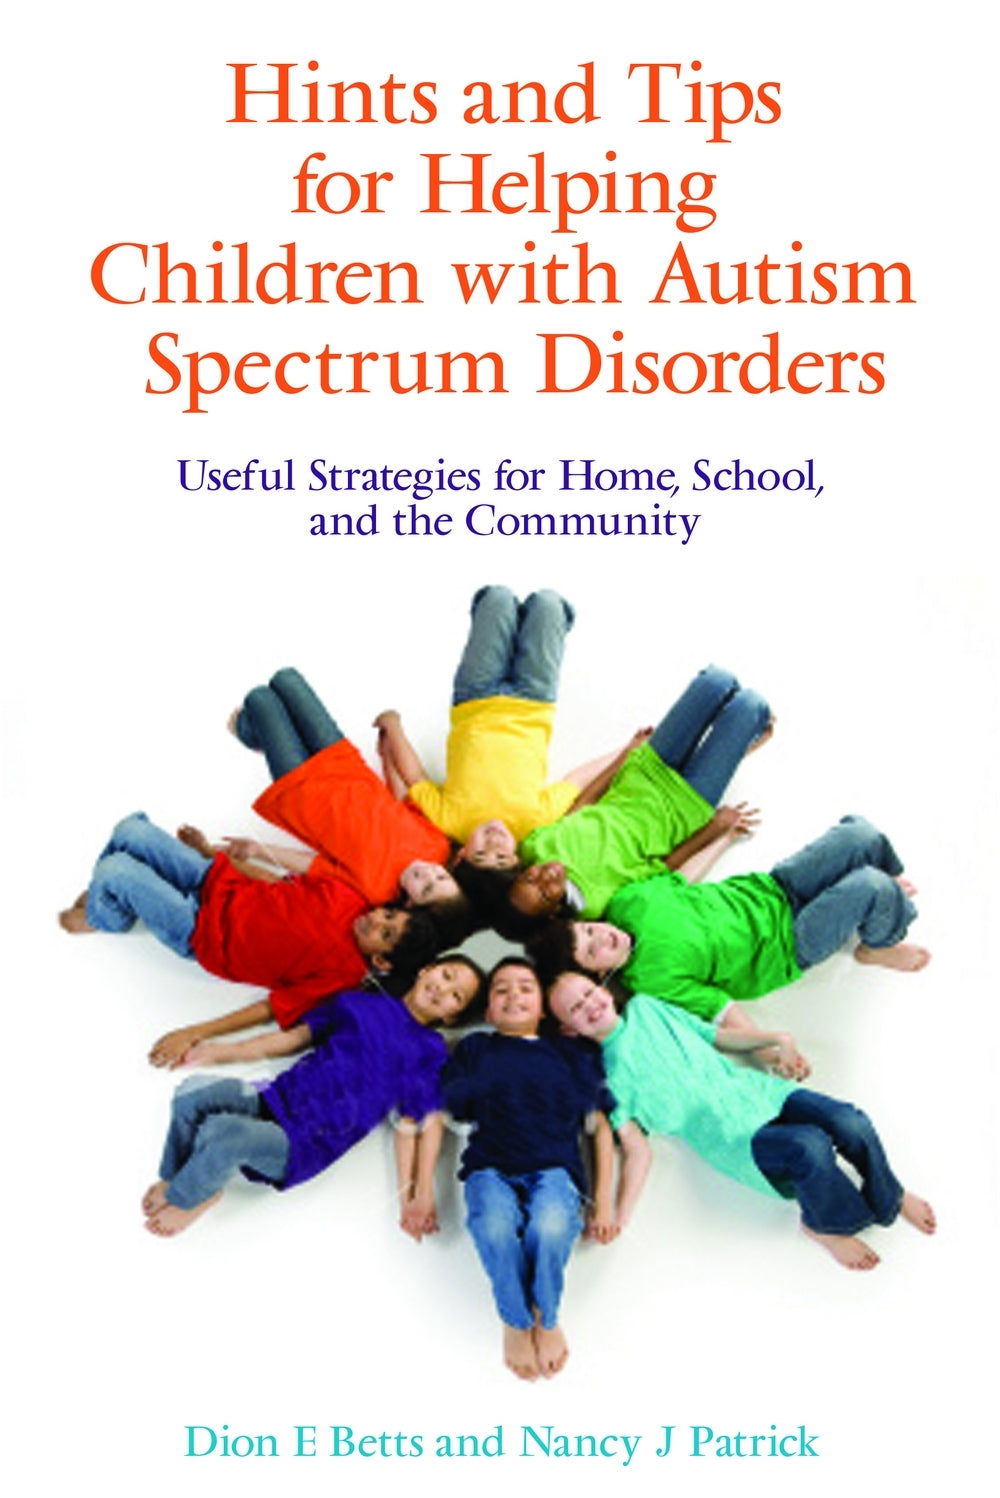 Hints and Tips for Helping Children with Autism Spectrum Disorders by Nancy J Patrick, Dion Betts